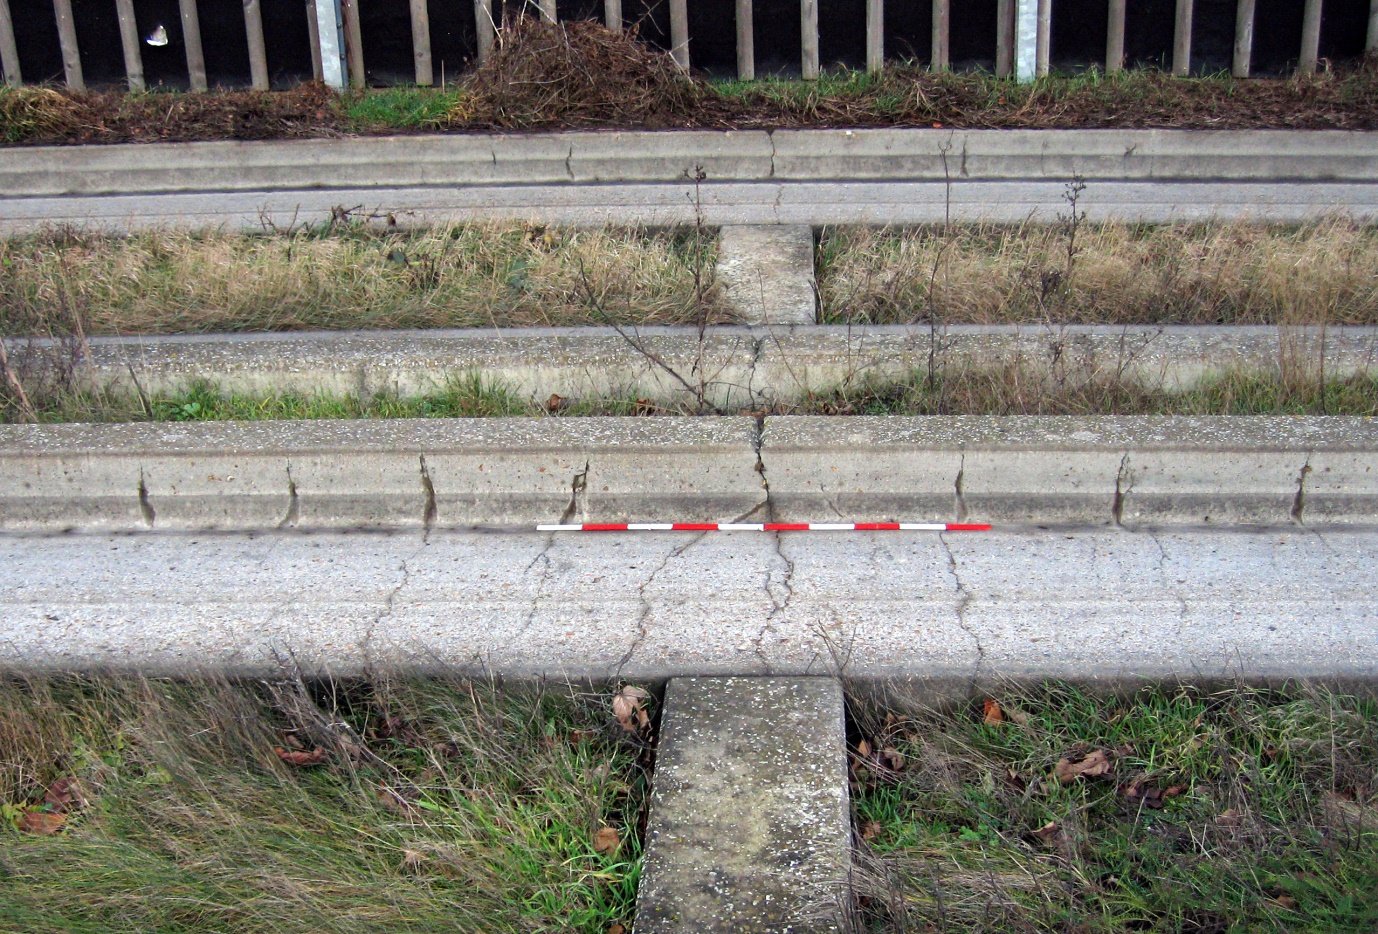 View of the middle of a Guided Busway beam